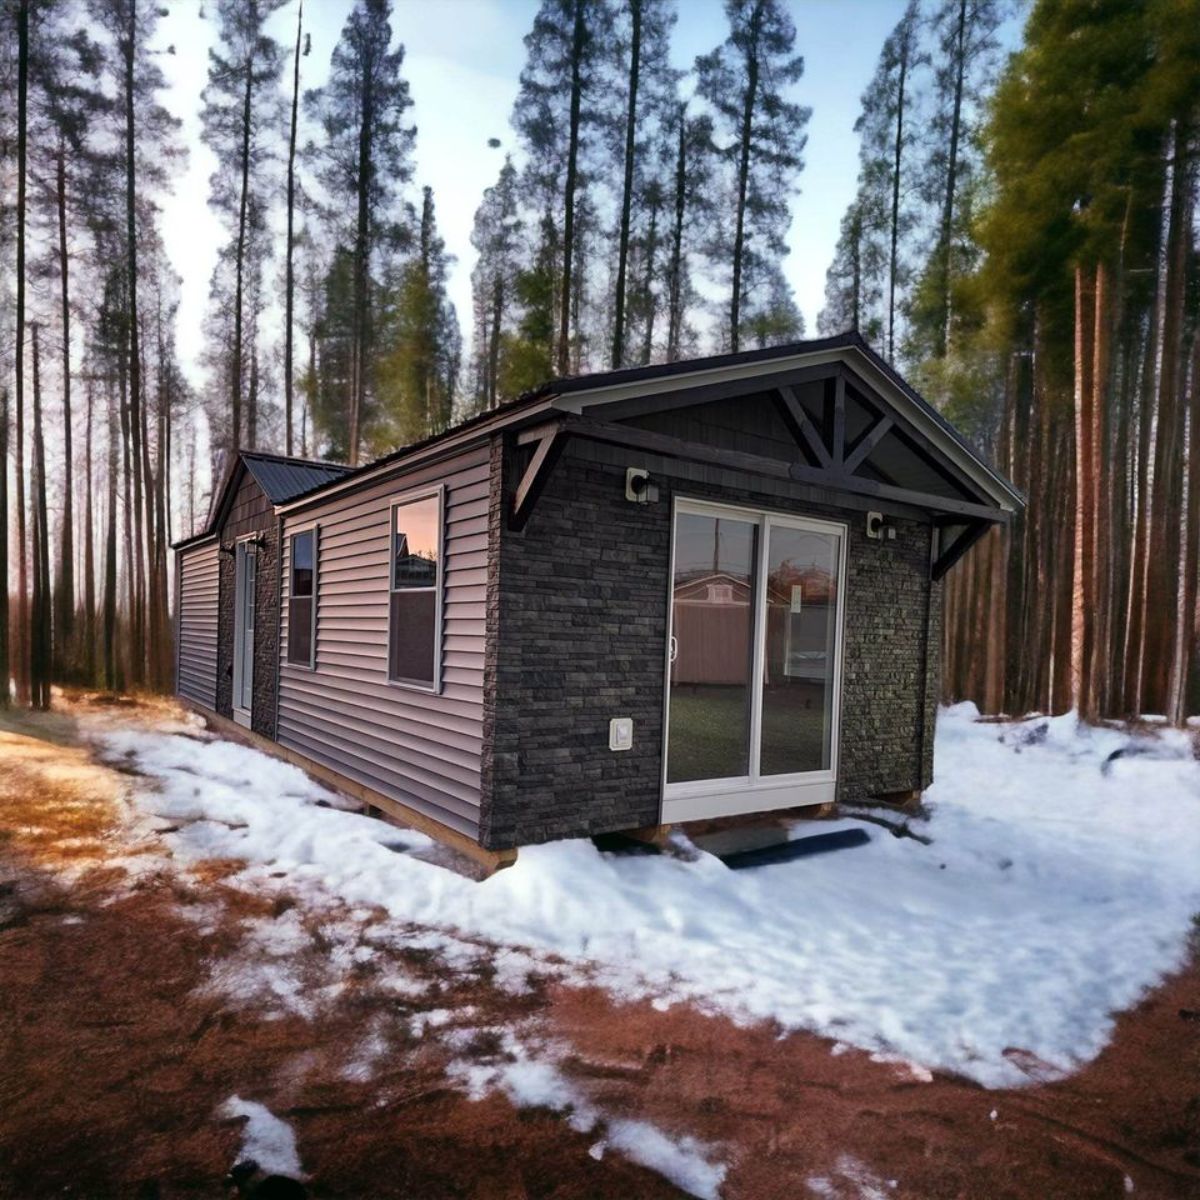 stunning main entrance and exterior of spacious tiny home